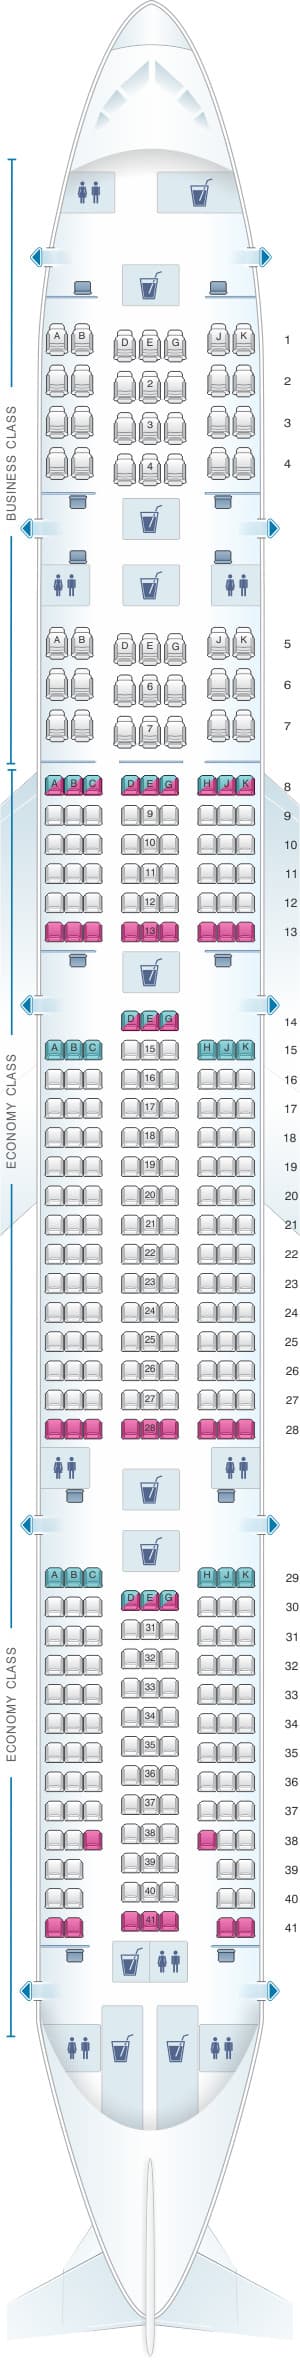 Boeing 777-300ER Seat Map Turkish Airlines